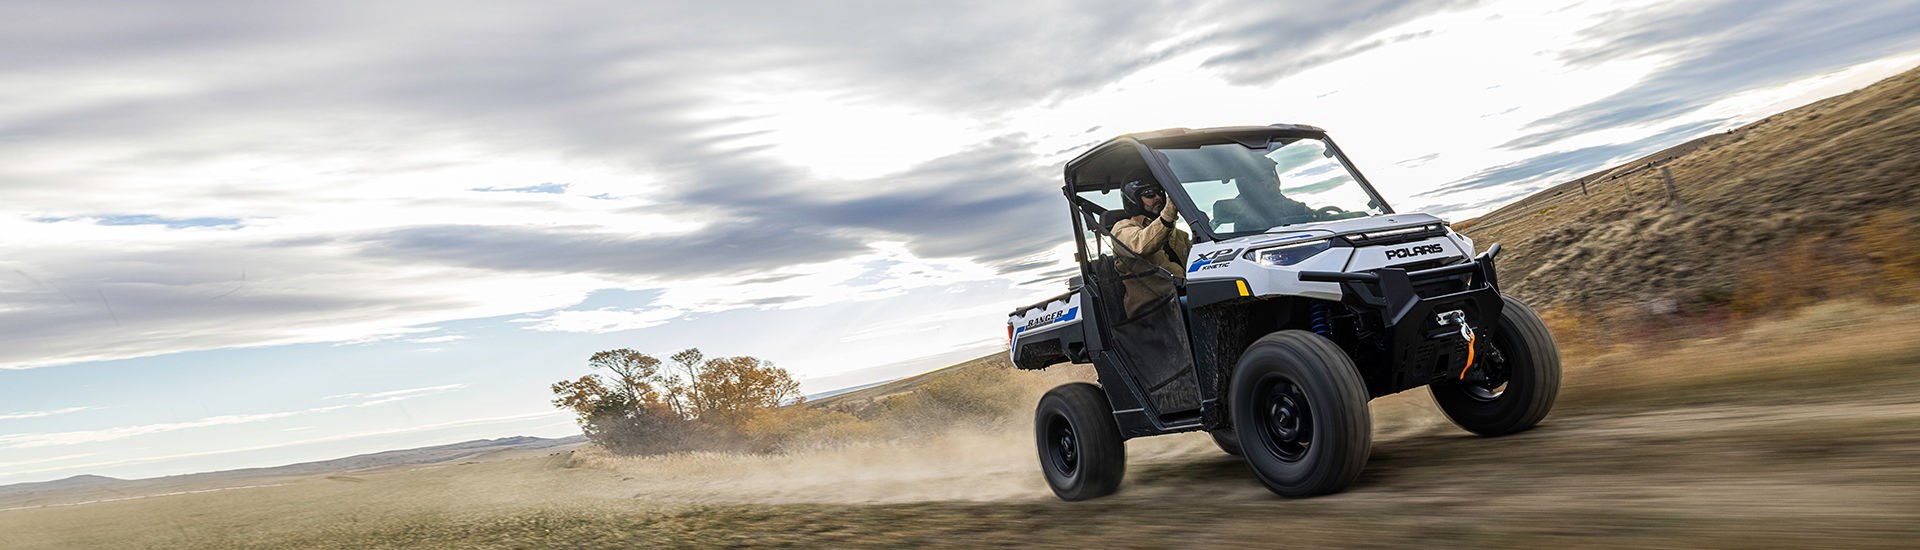 Polaris Ranger Side By Side UTV Tire Sales, Tire Replacement Service, Tire Mounting, And Repair Near Katy, Texas.